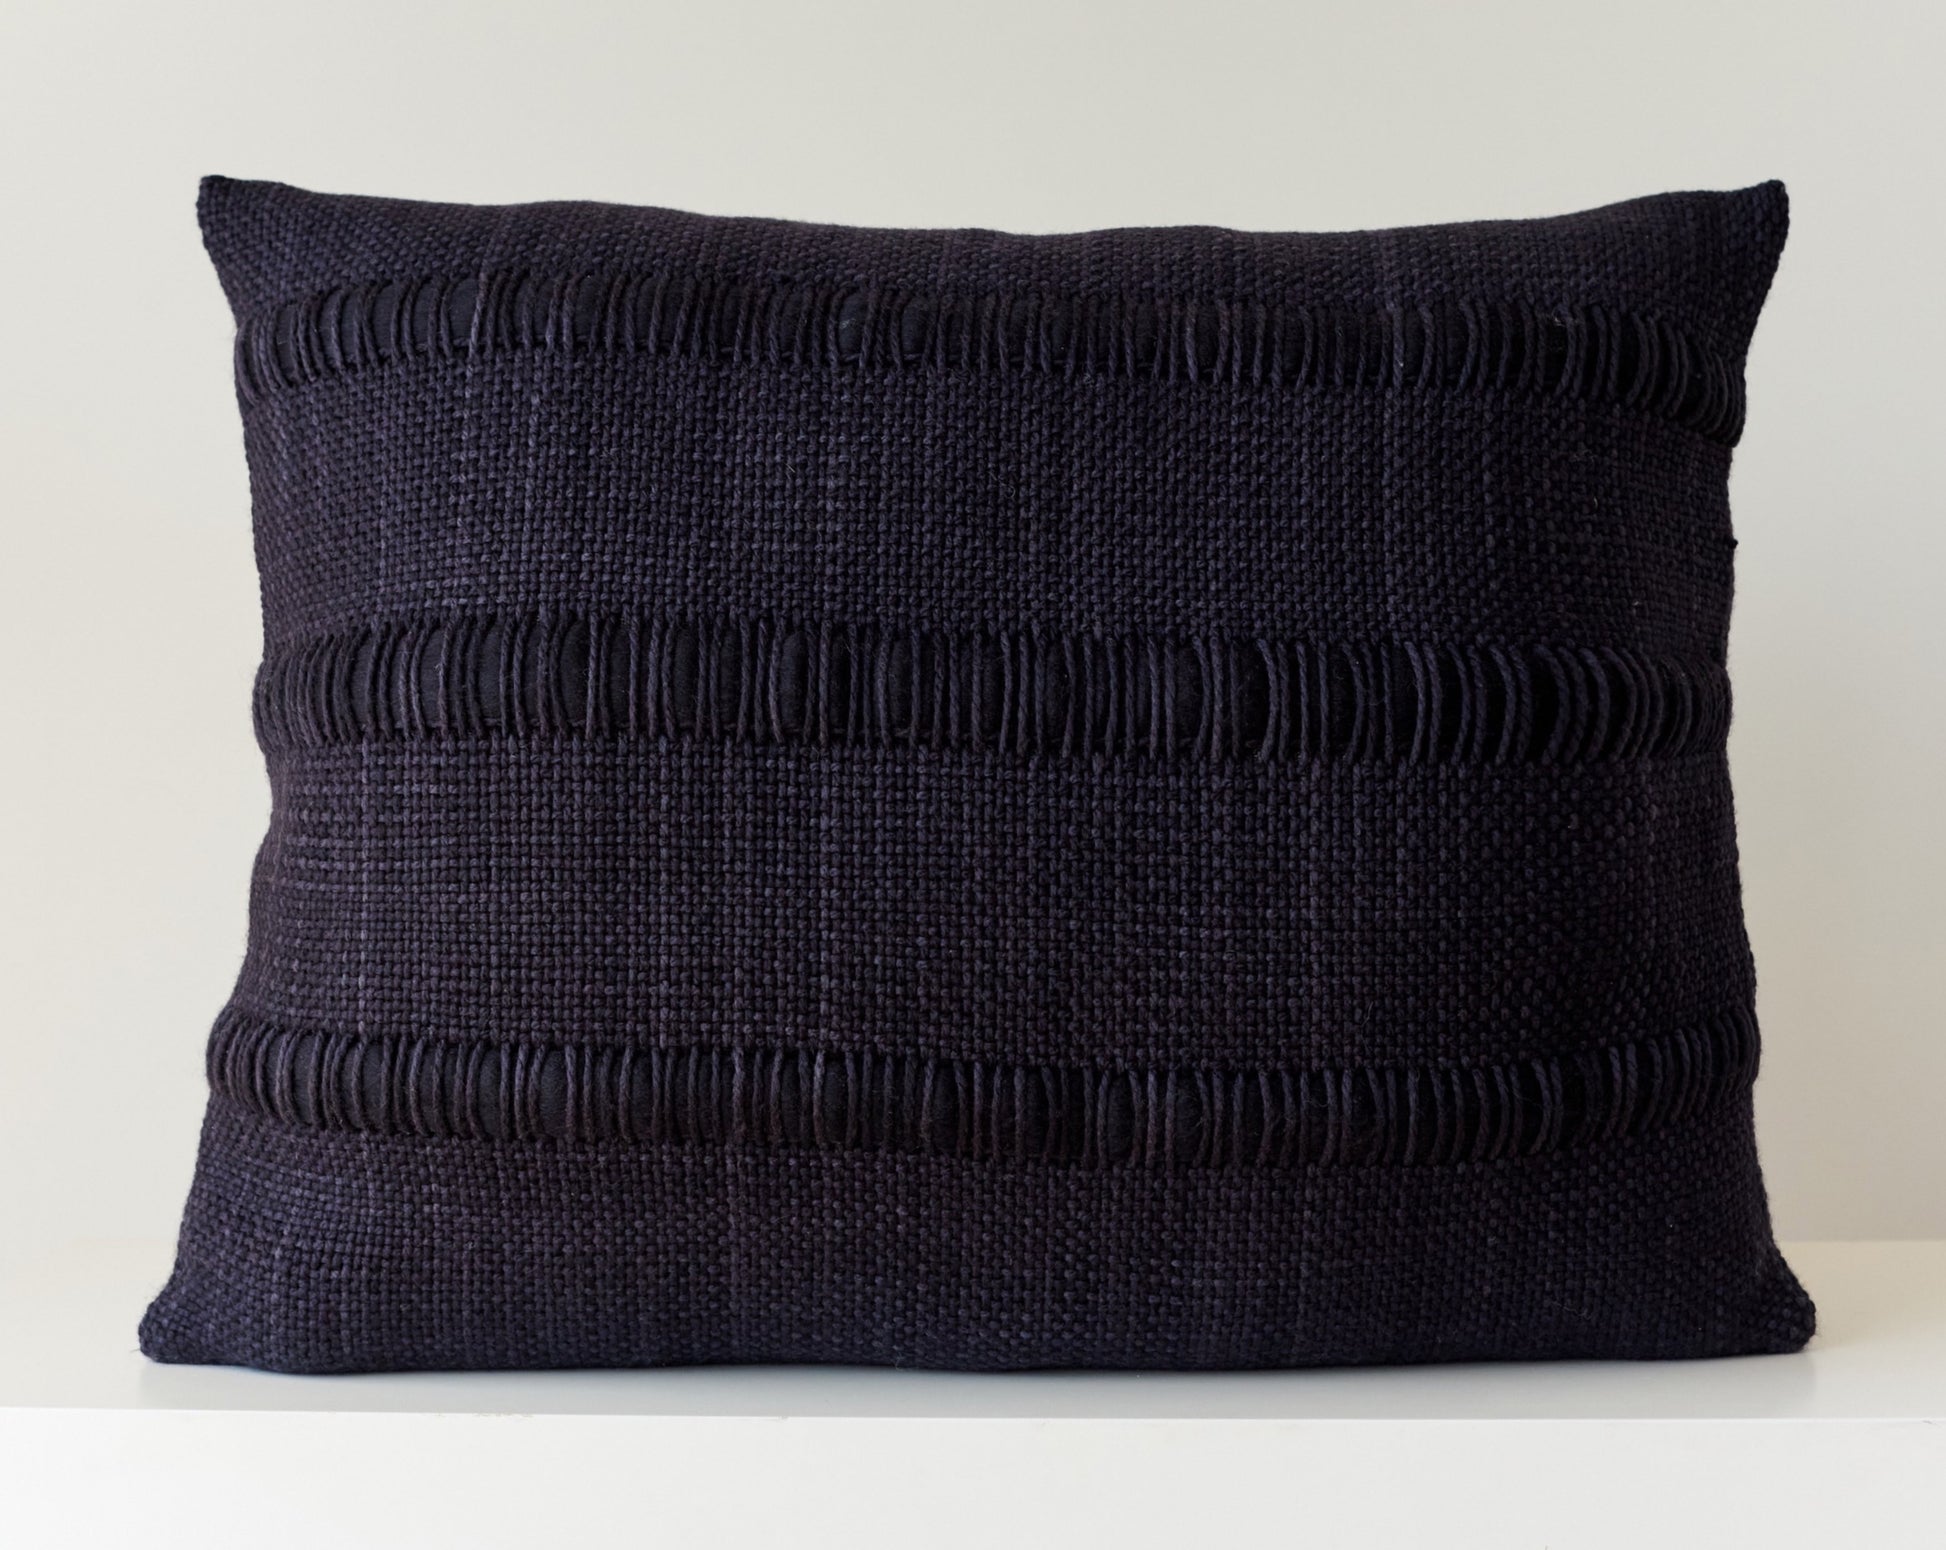 Black woven pillow handwoven with stripes of roving merino wool